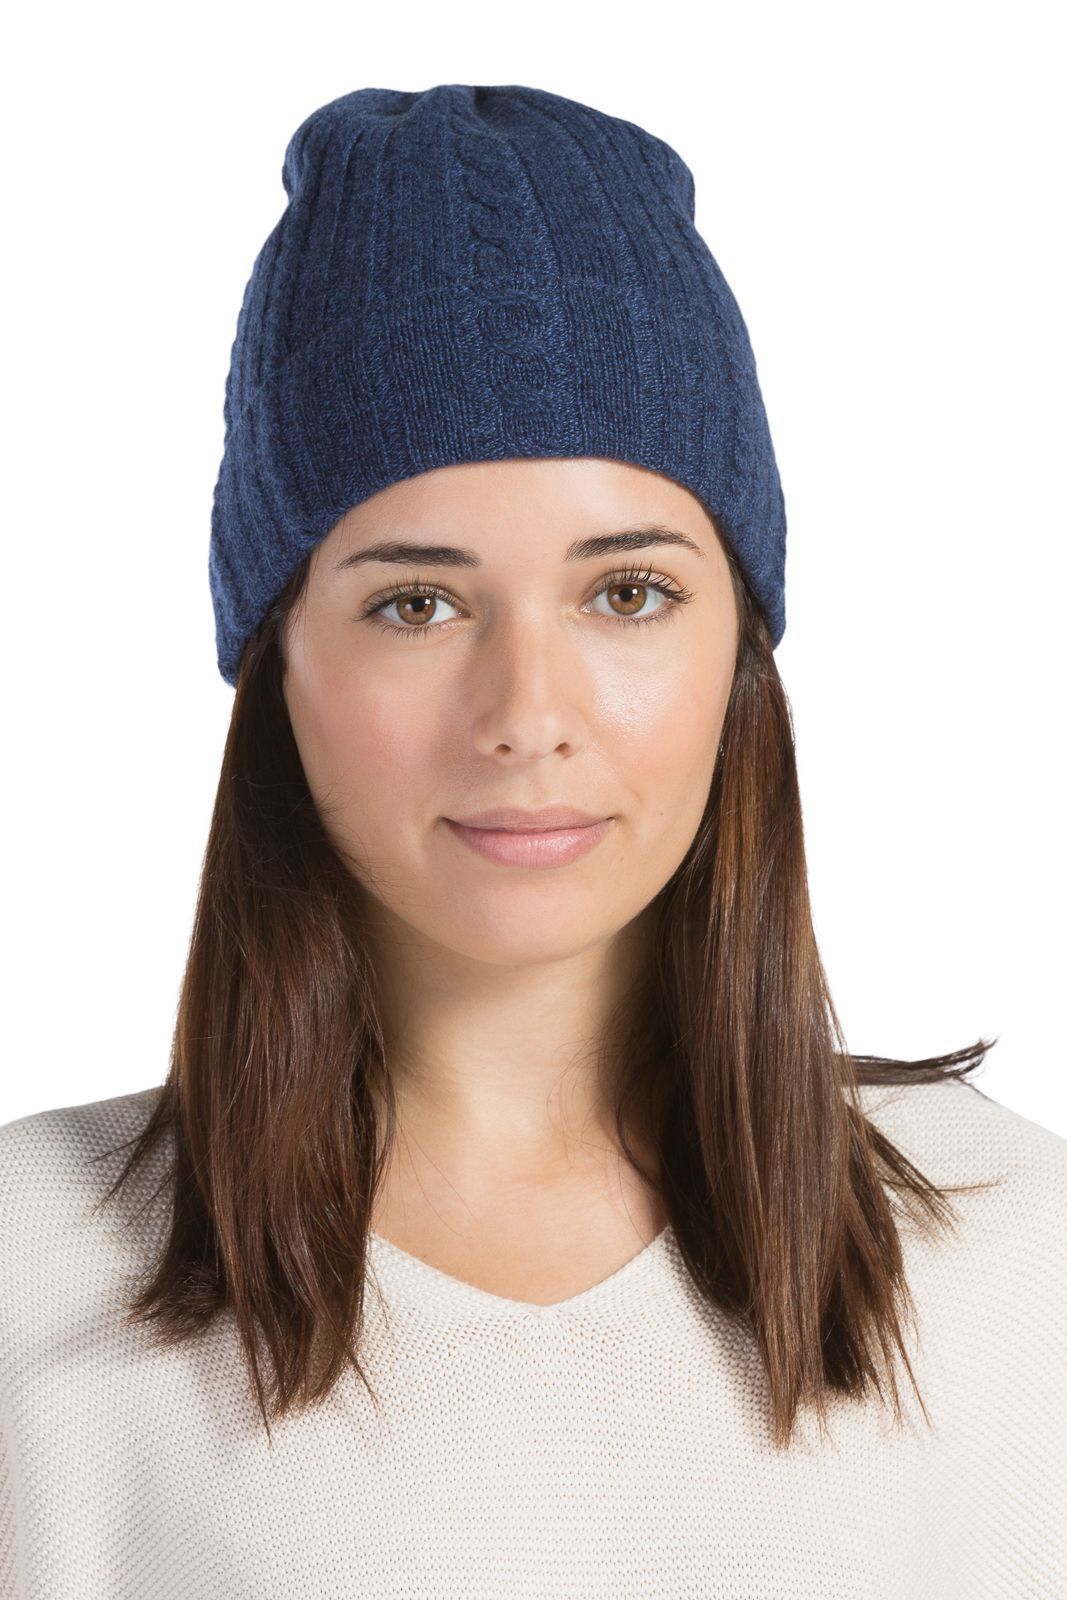 Women's 100% Pure Cashmere Cable Knit Hat Womens>Accessories>Hat Fishers Finery Heather Navy One Size 